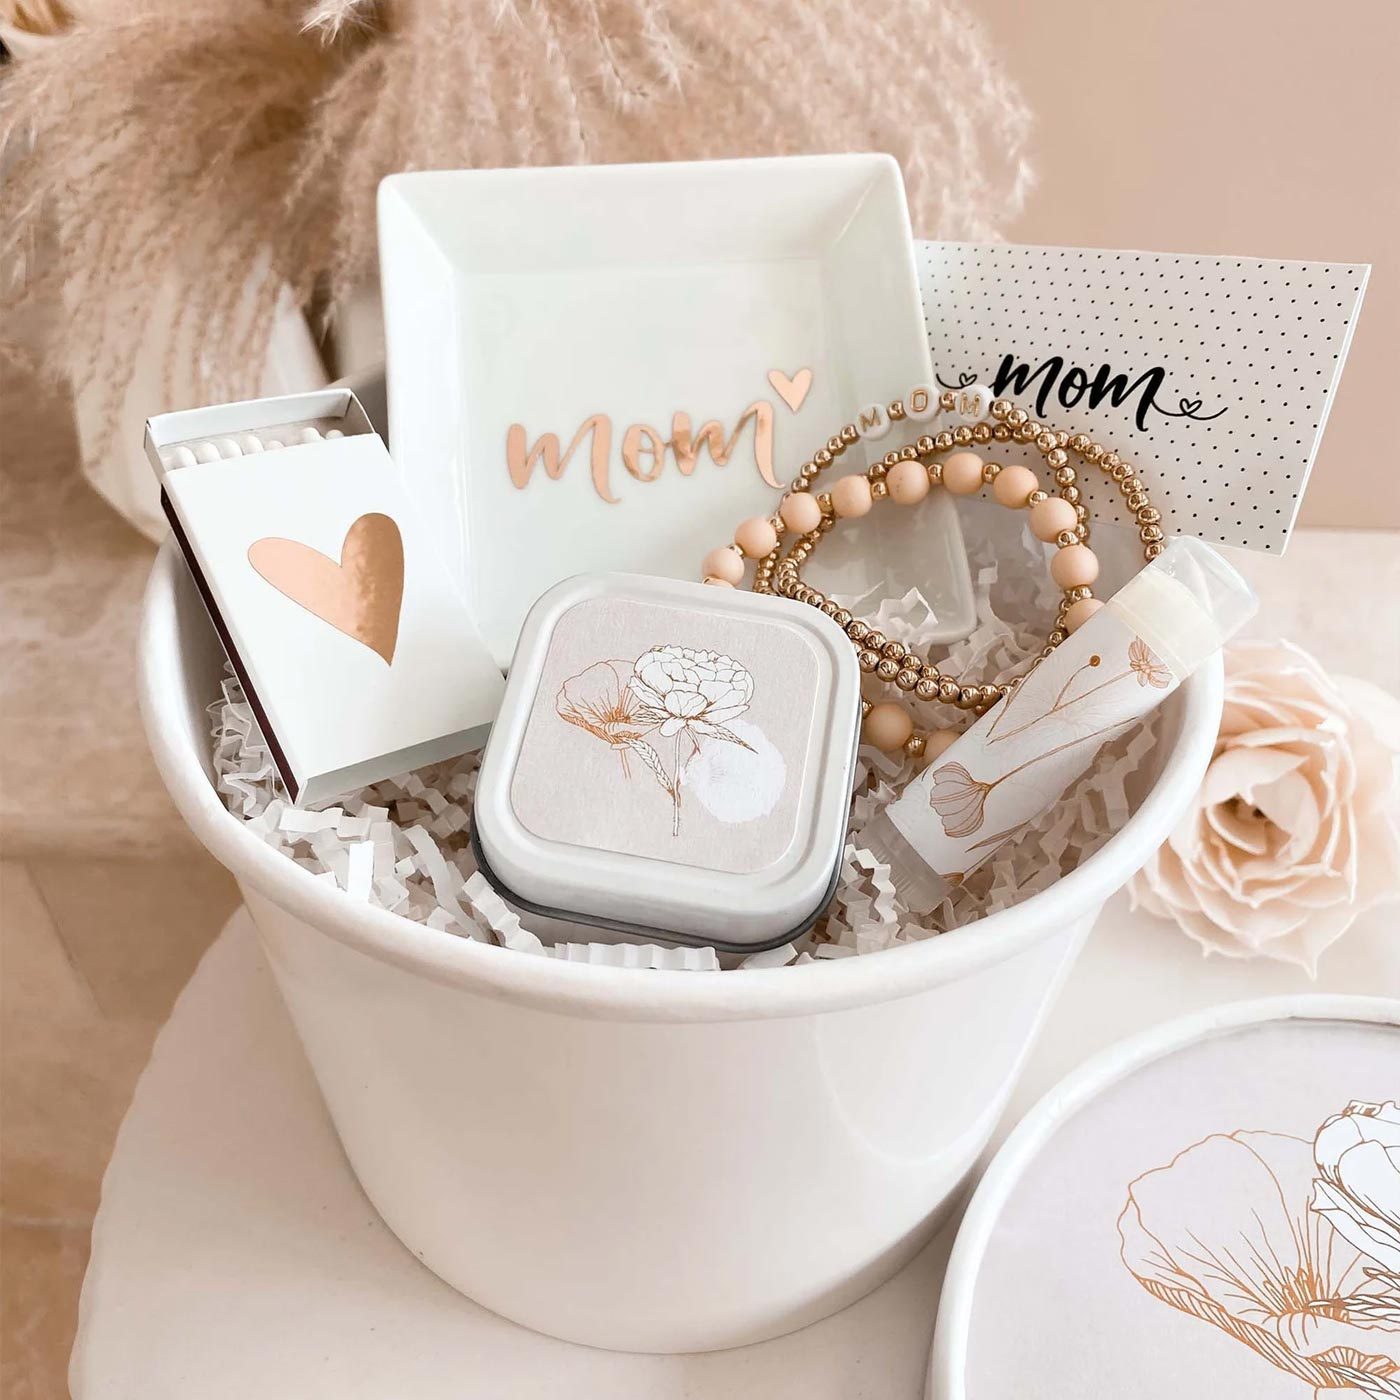 Mom Birthday Gifts, Mom Gifts from Daughter Son, Best Moms Ever Gift  Baskets Ideas, Cool to My Mom Gifts, Unique Mothers Day Present for Moms  Who Have